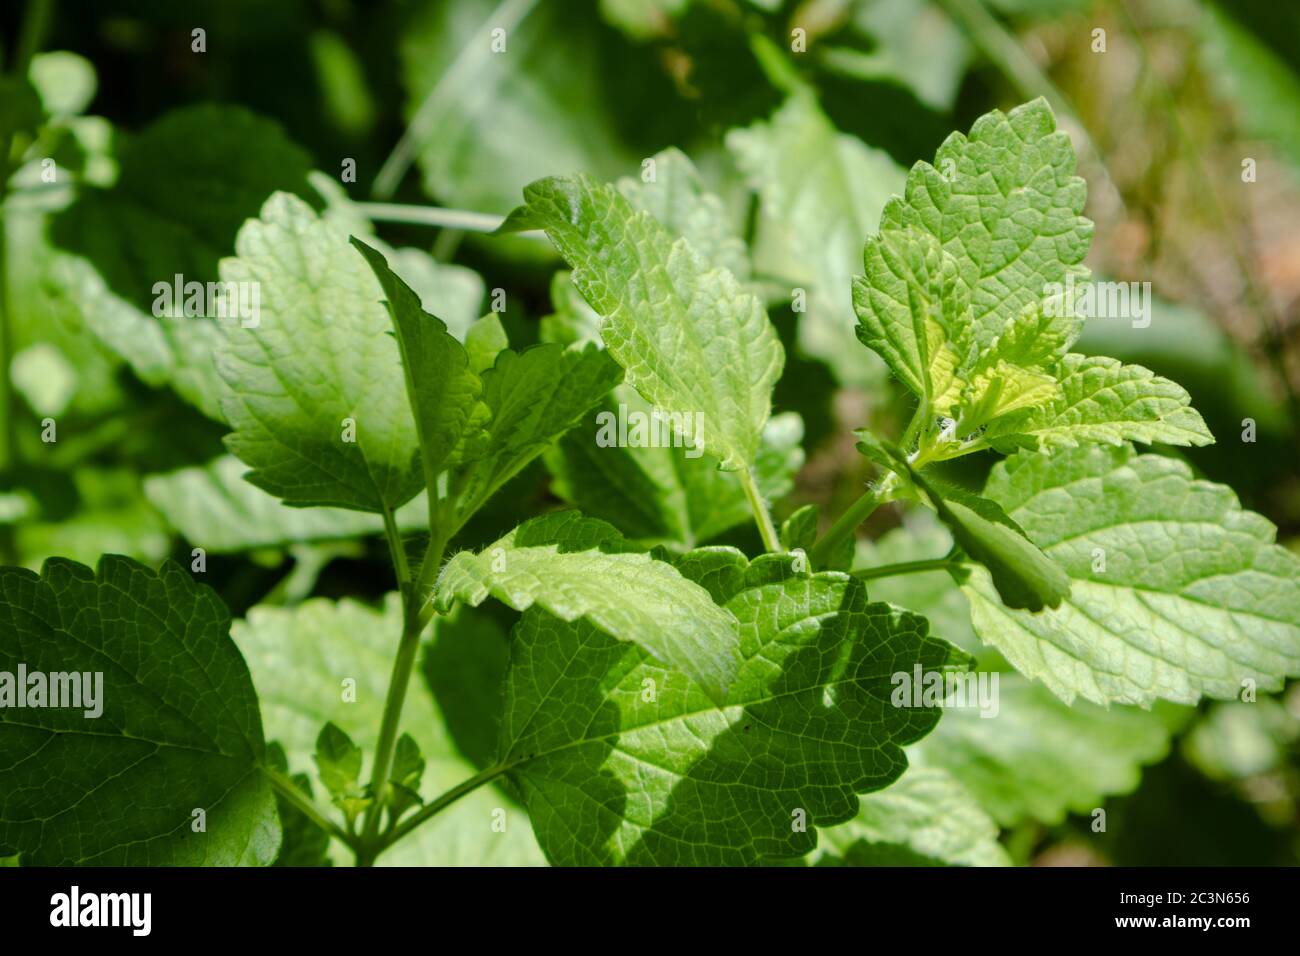 Bright green fresh mint herb growing in garden close-up. Greenery food aromatic spearmint on blurred background Stock Photo